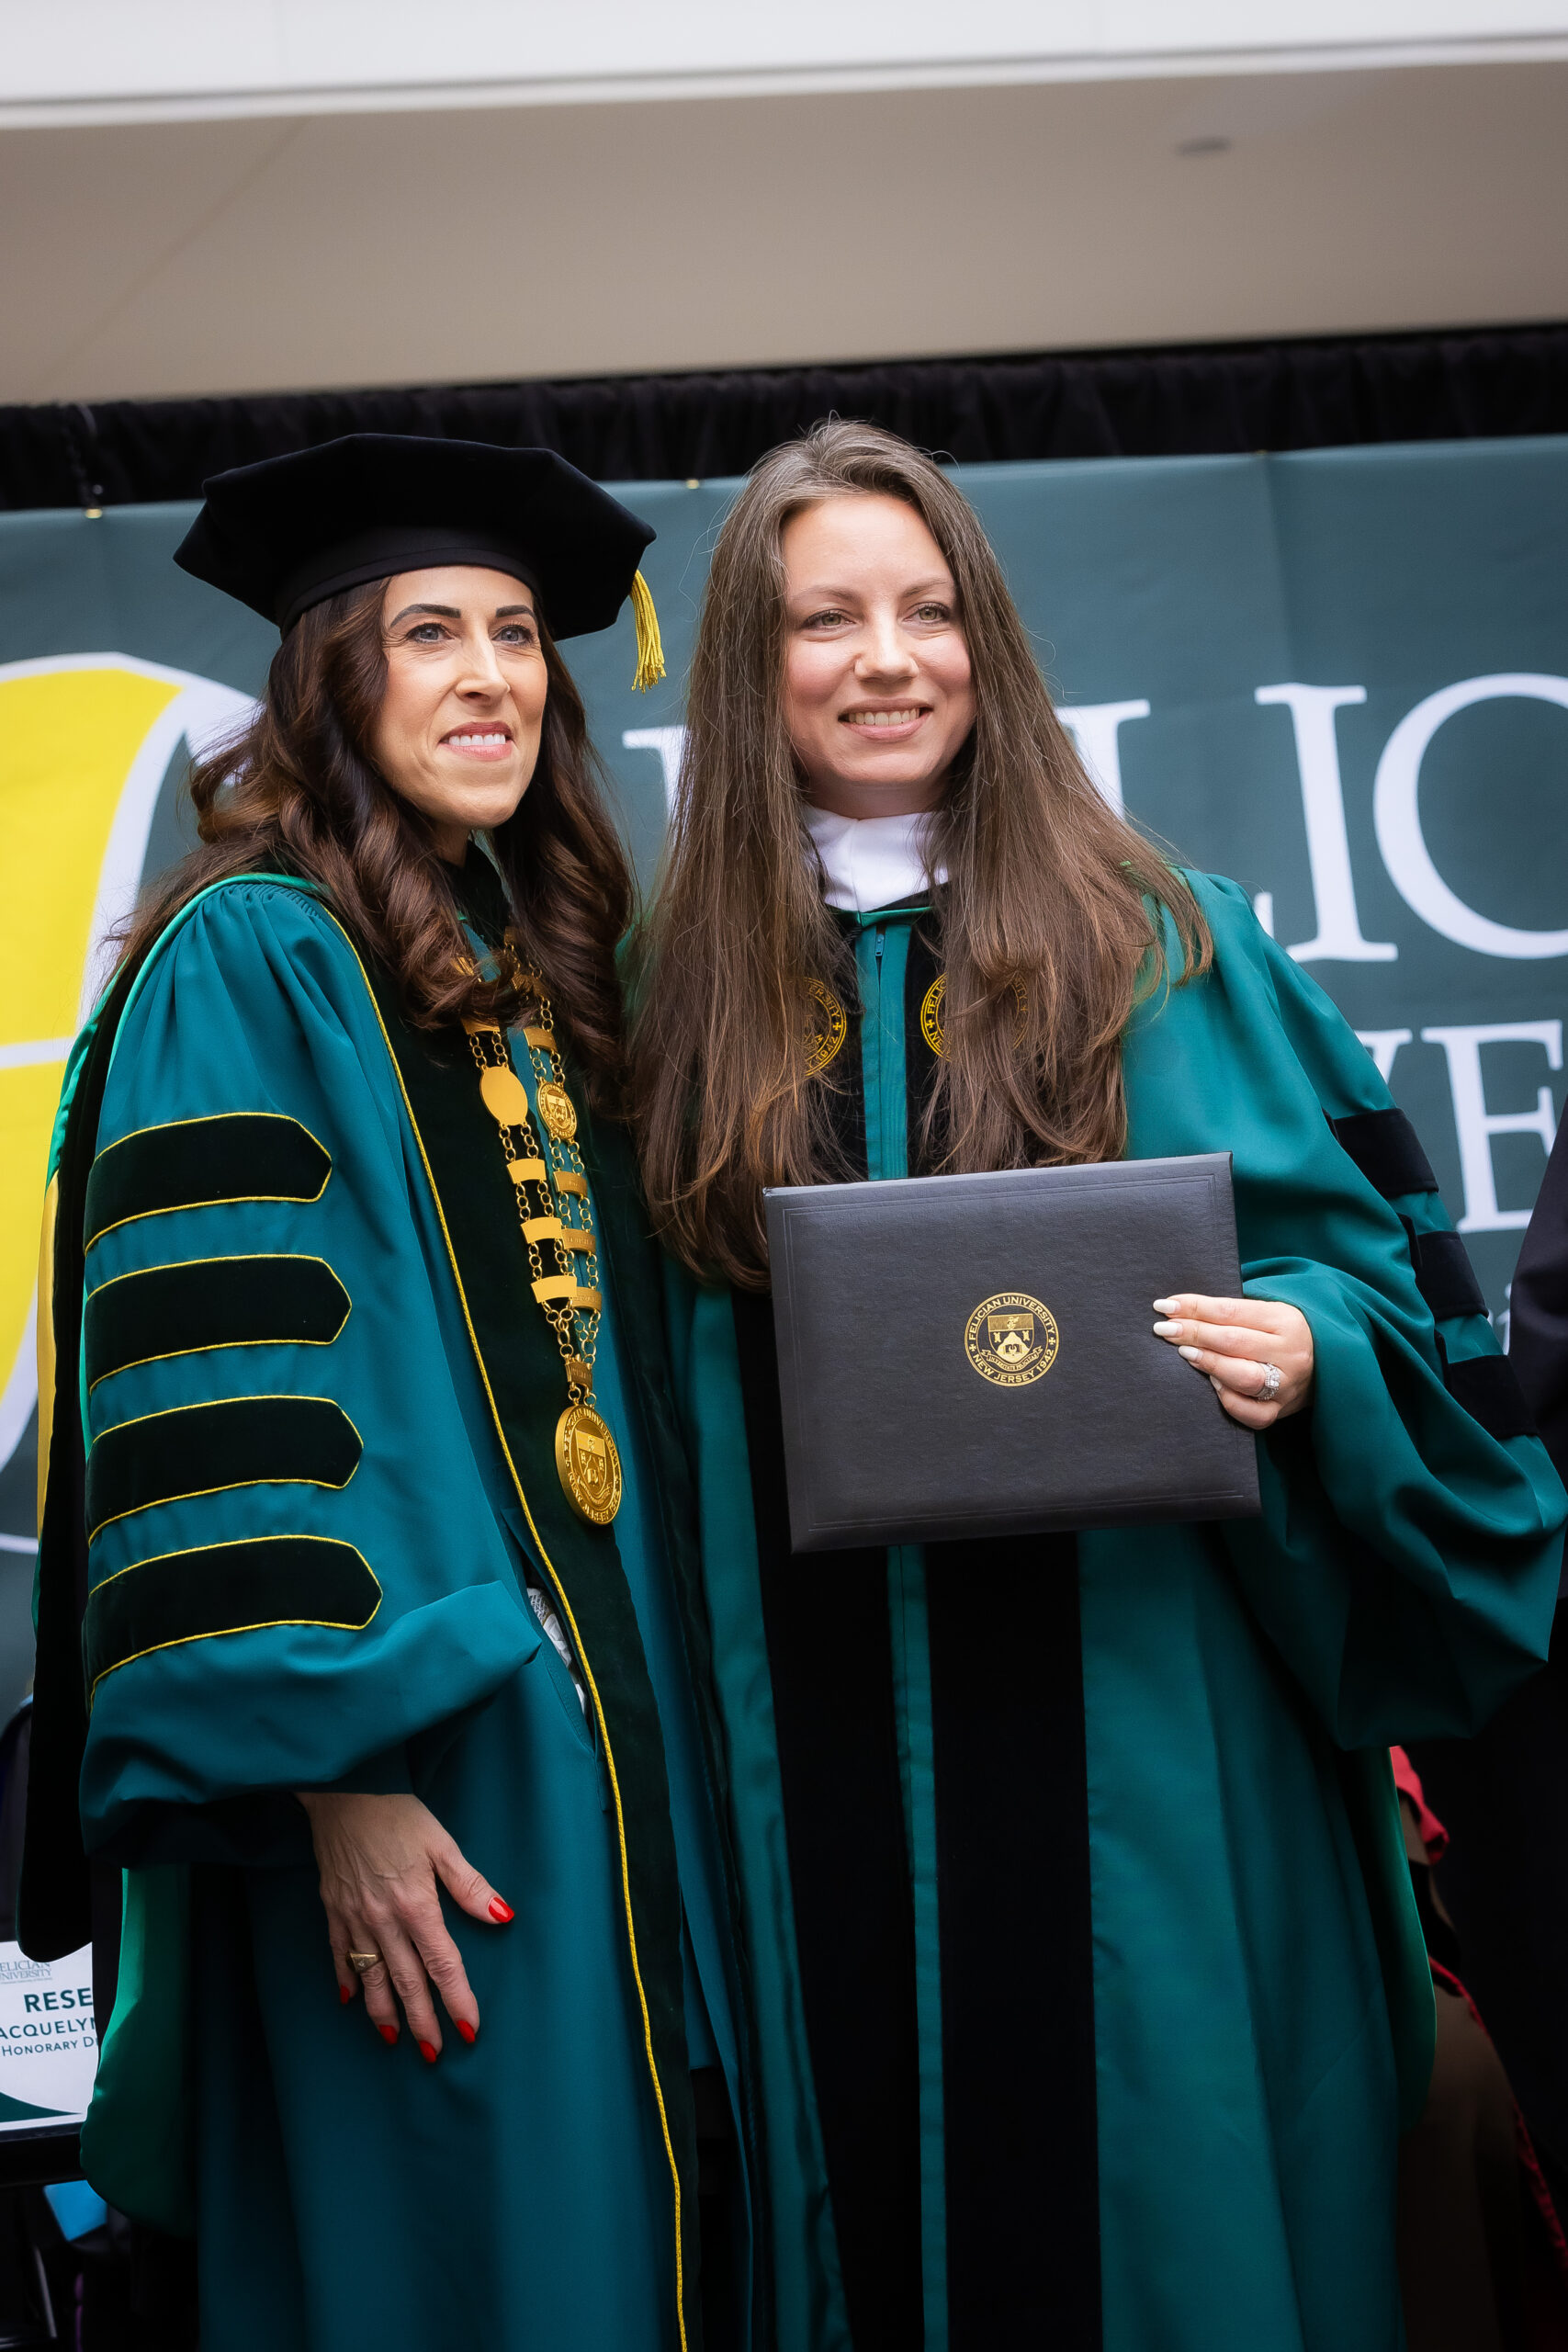 Felician University President Dr. Mildred A. Mihlon (left) with Commissioner Jacquelyn A. Suarez (right)